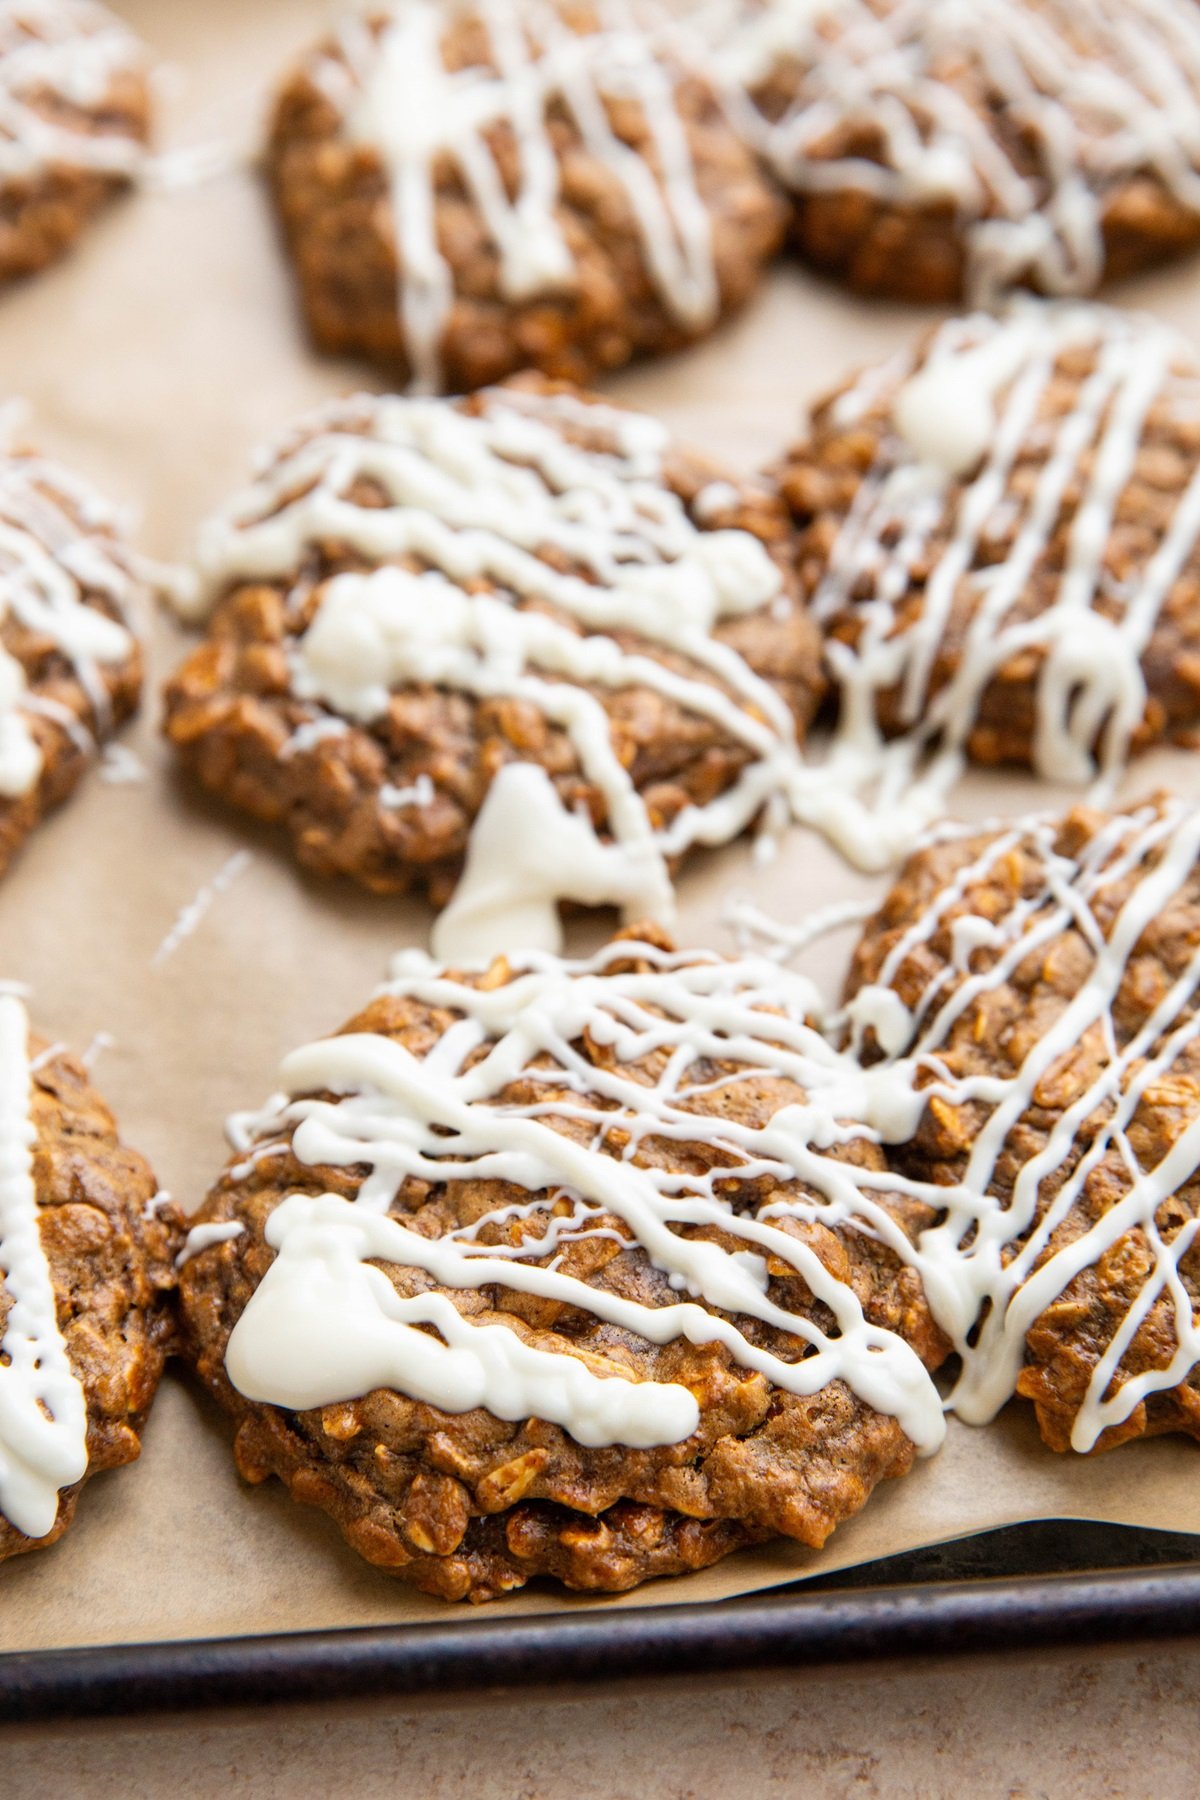 Oatmeal molasses cookies drizzled with melted white chocolate on a baking sheet.